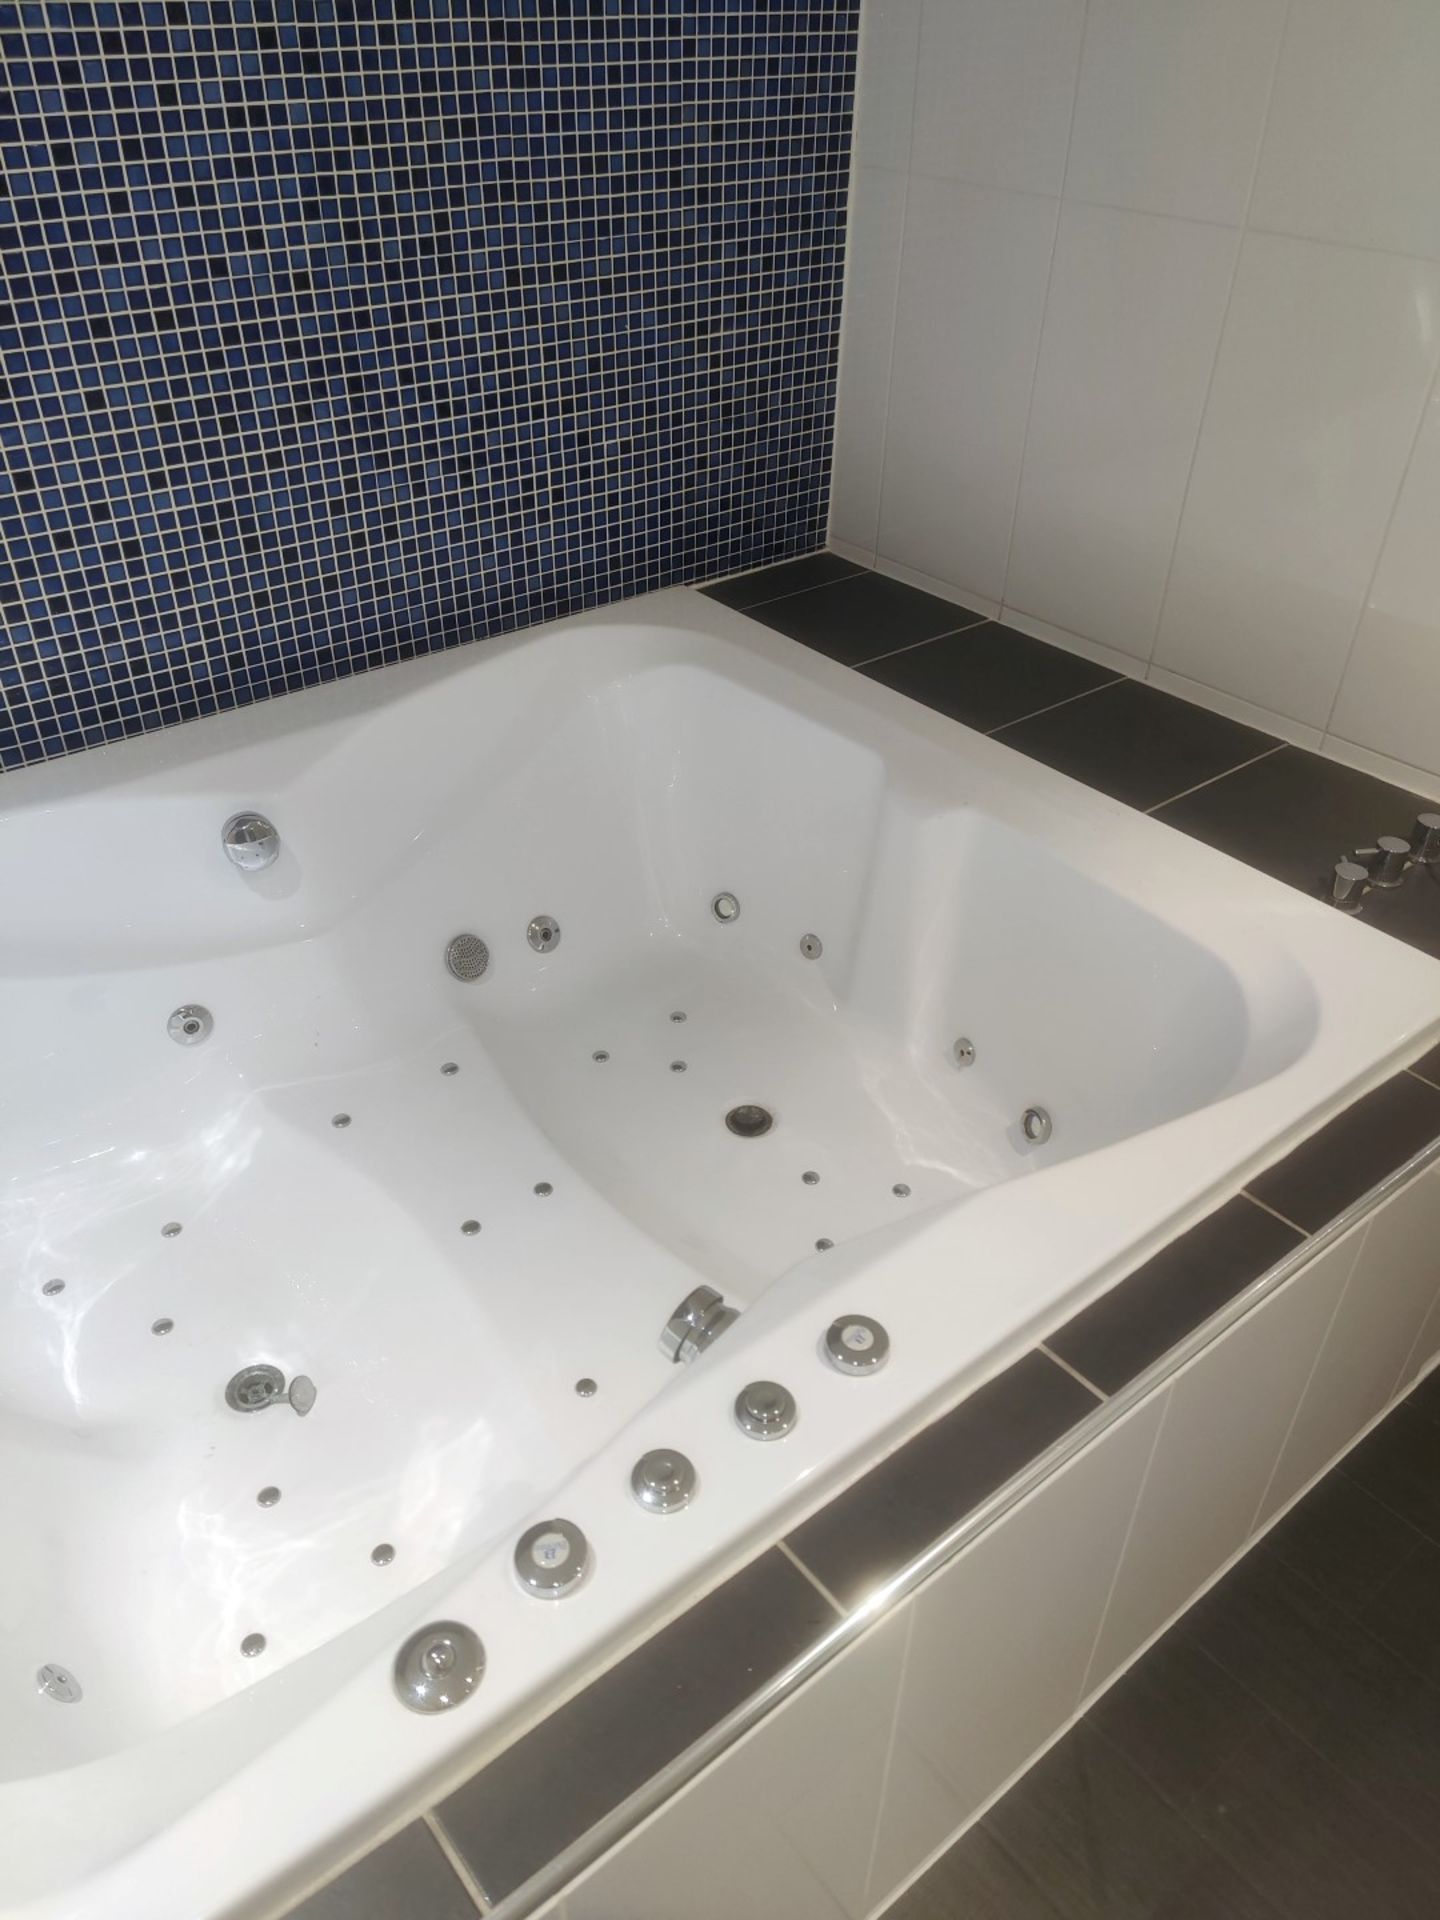 1 x Bronte Jacuzzi Whirlpool Bath - Approx 6.5ft x 5ft Size - Includes Brassware, Water Jets & Pump - Image 13 of 15